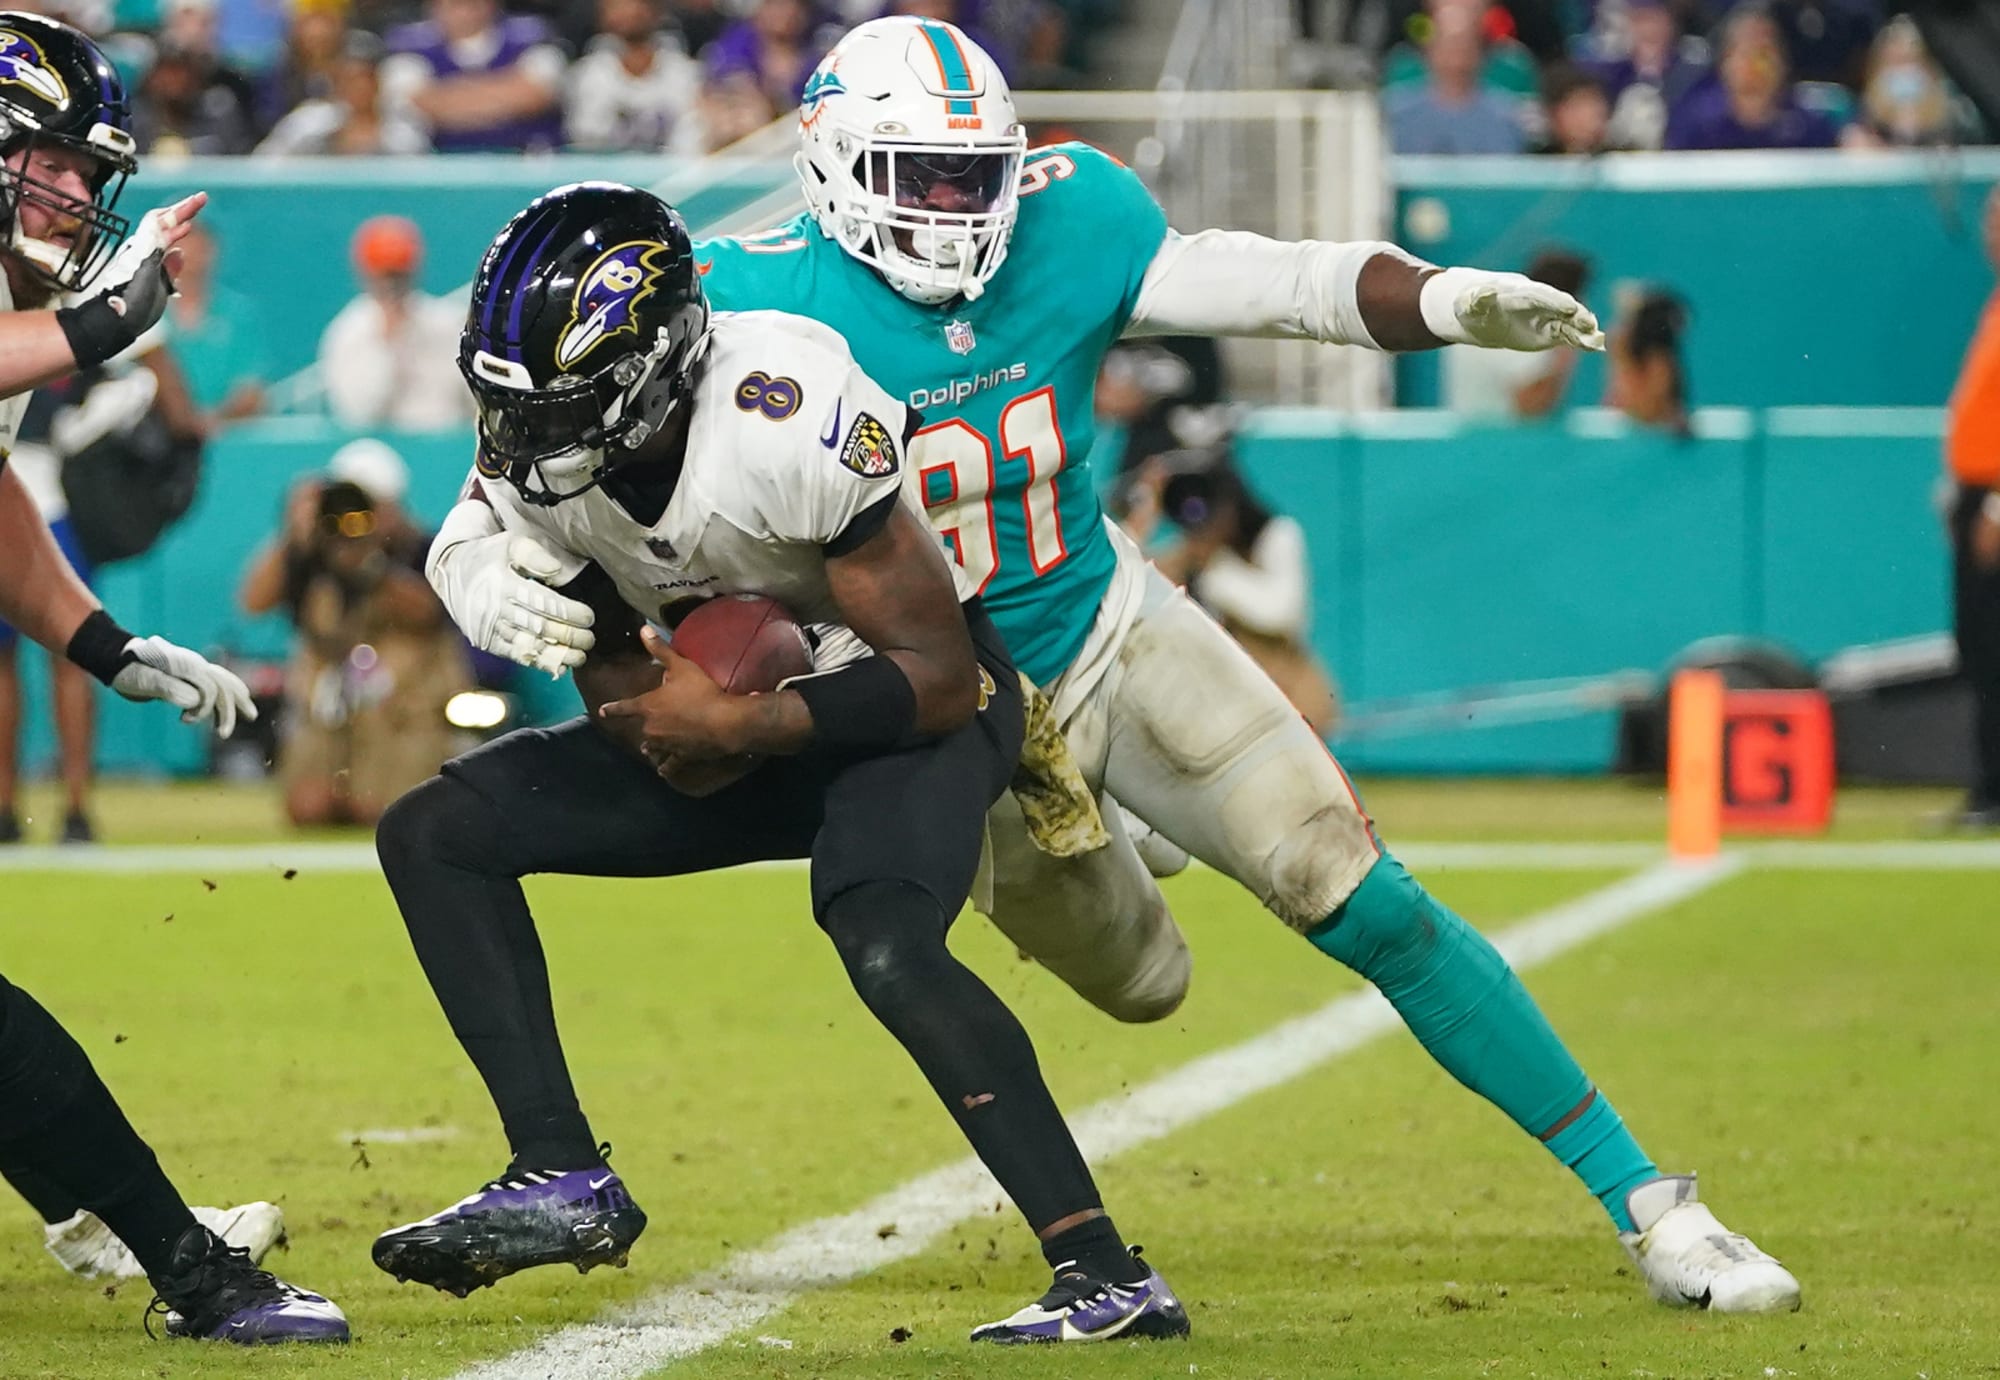 The 31 million reasons the Miami Dolphins won't trade for Lamar Jackson